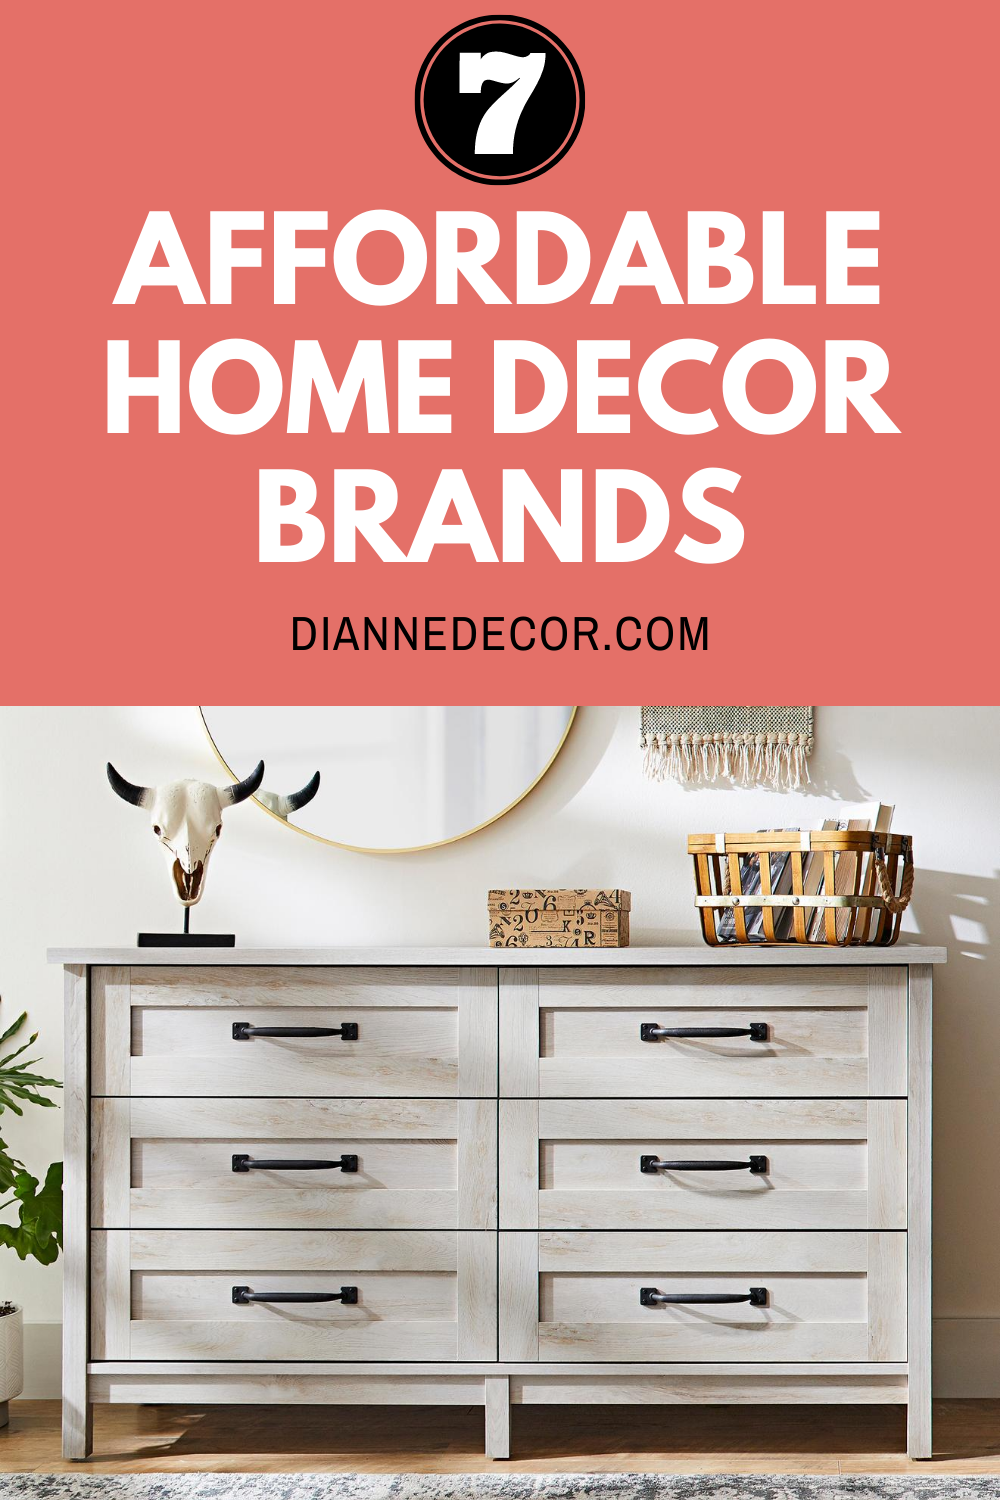 7 Affordable Home Decor Brands You Need To Know